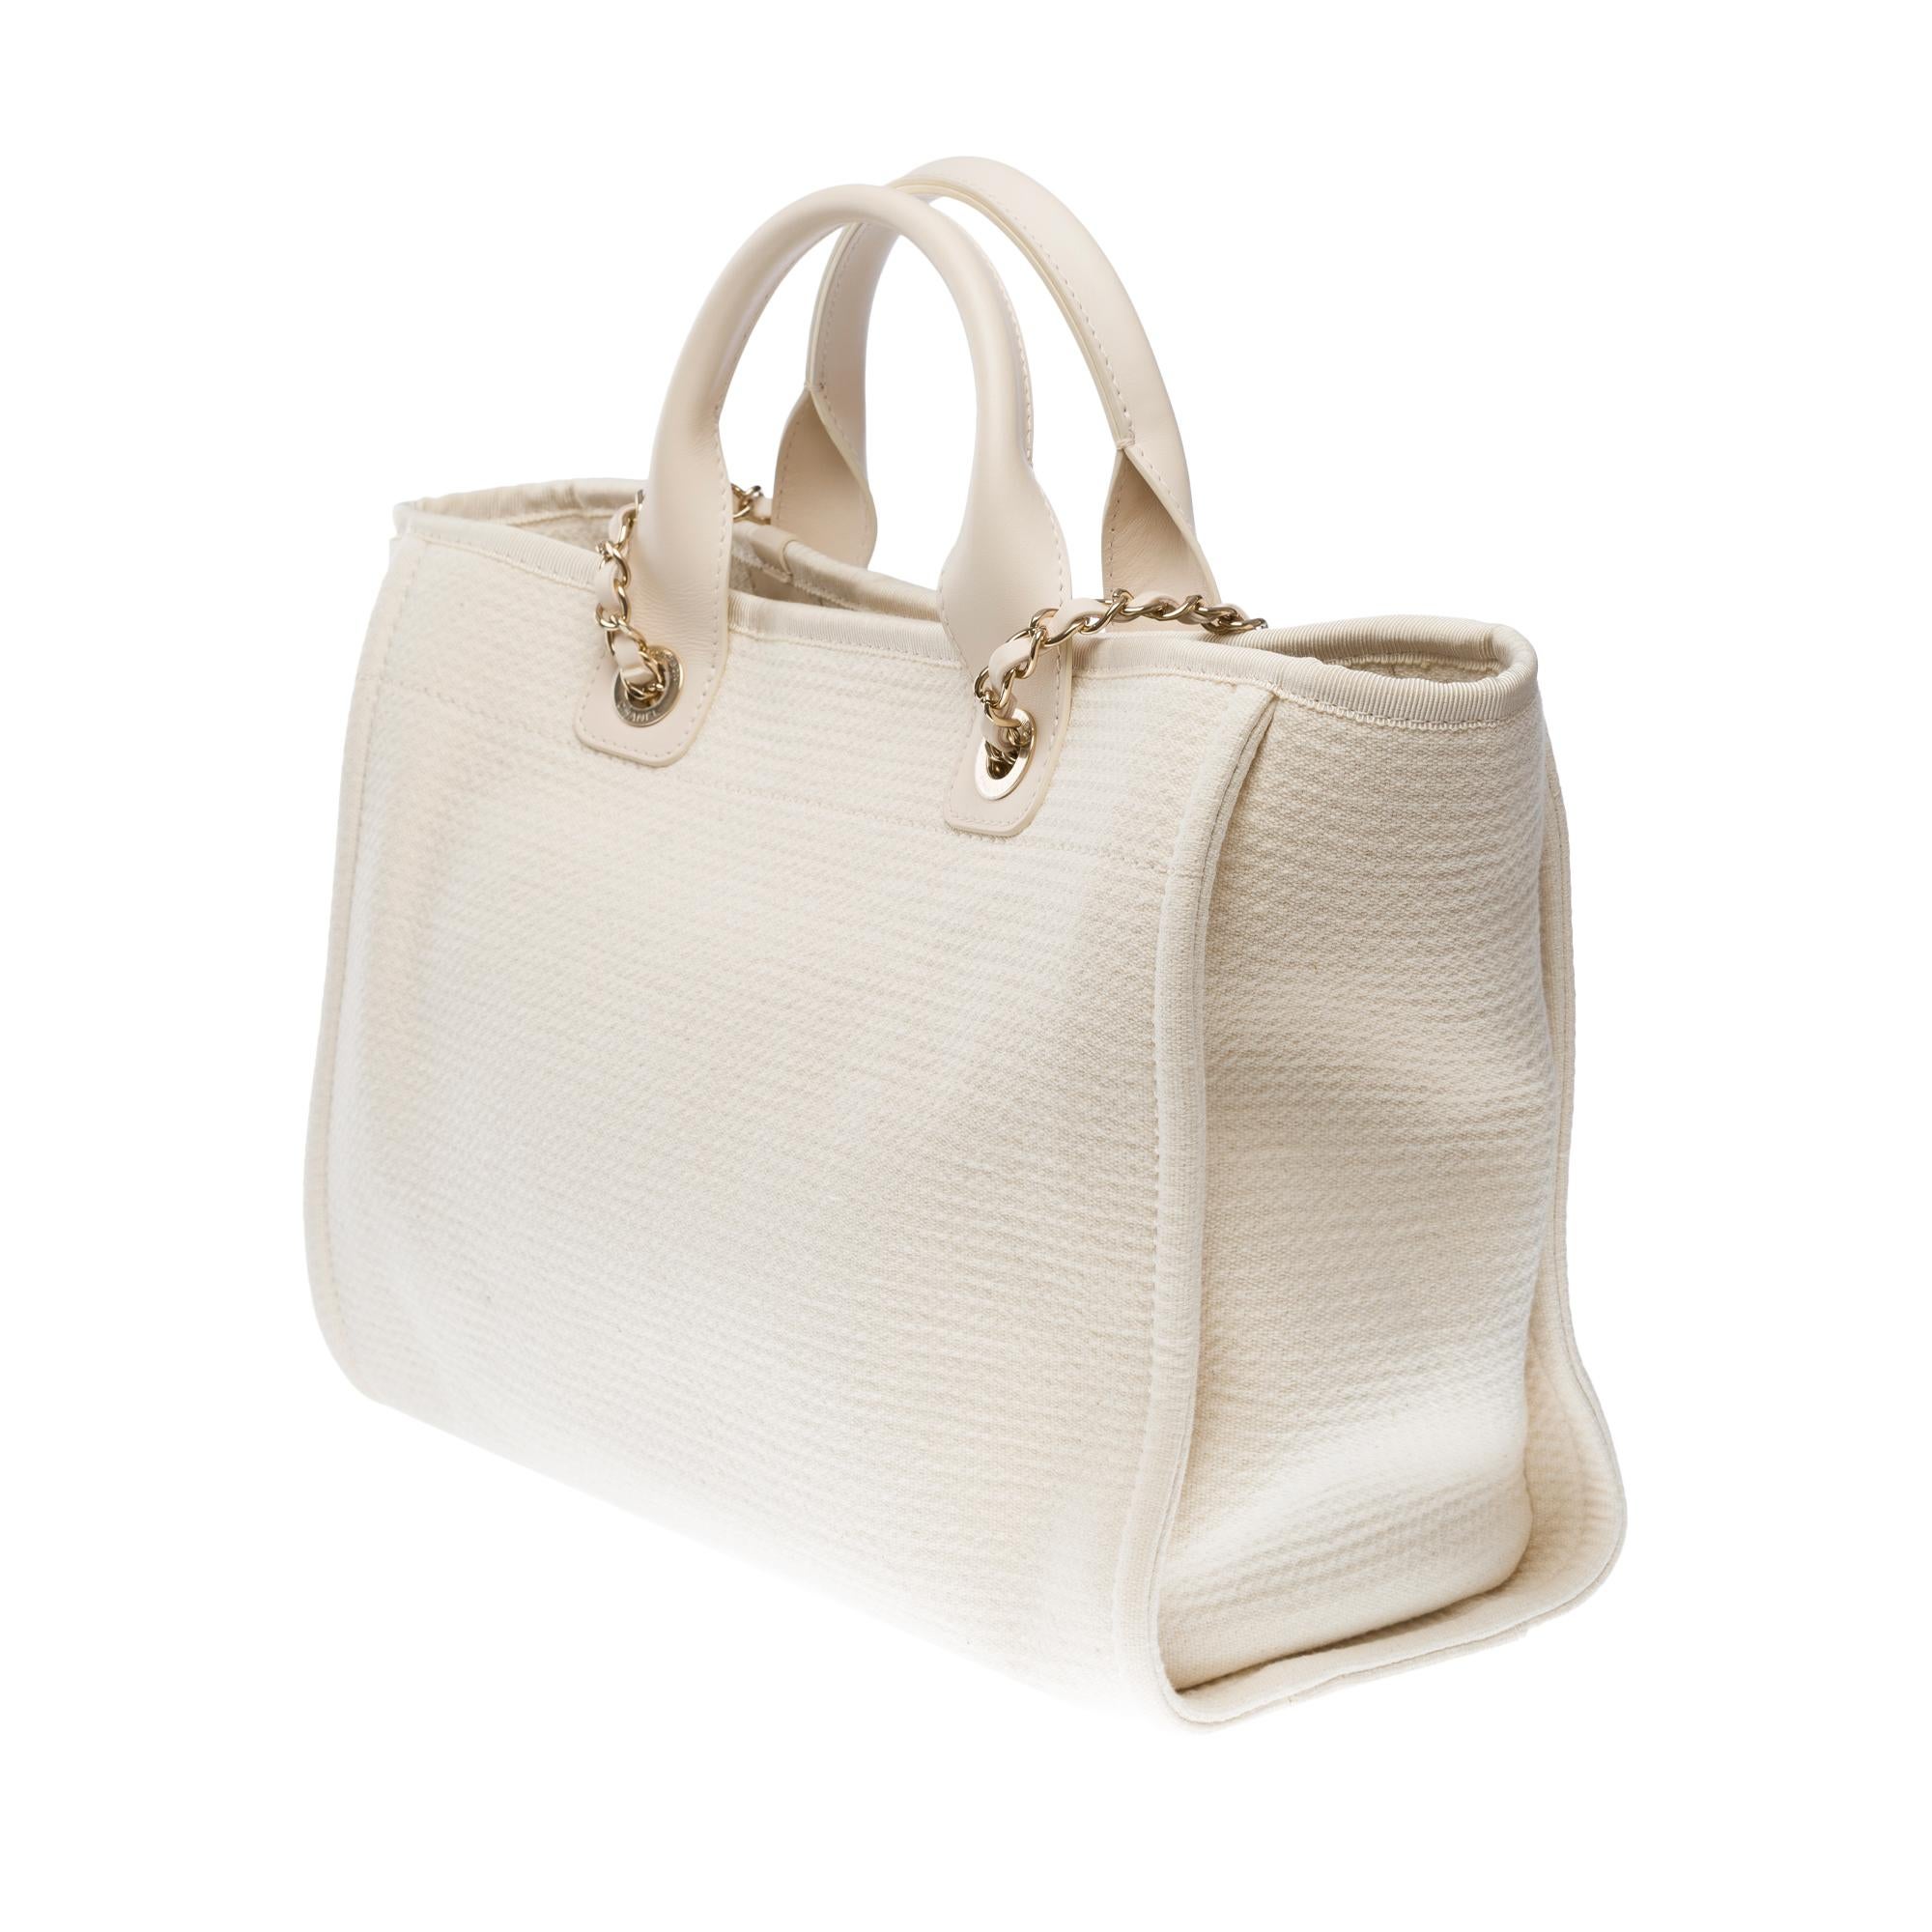 Amazing Chanel Deauville tote bag in off white canvas, SHW For Sale 3